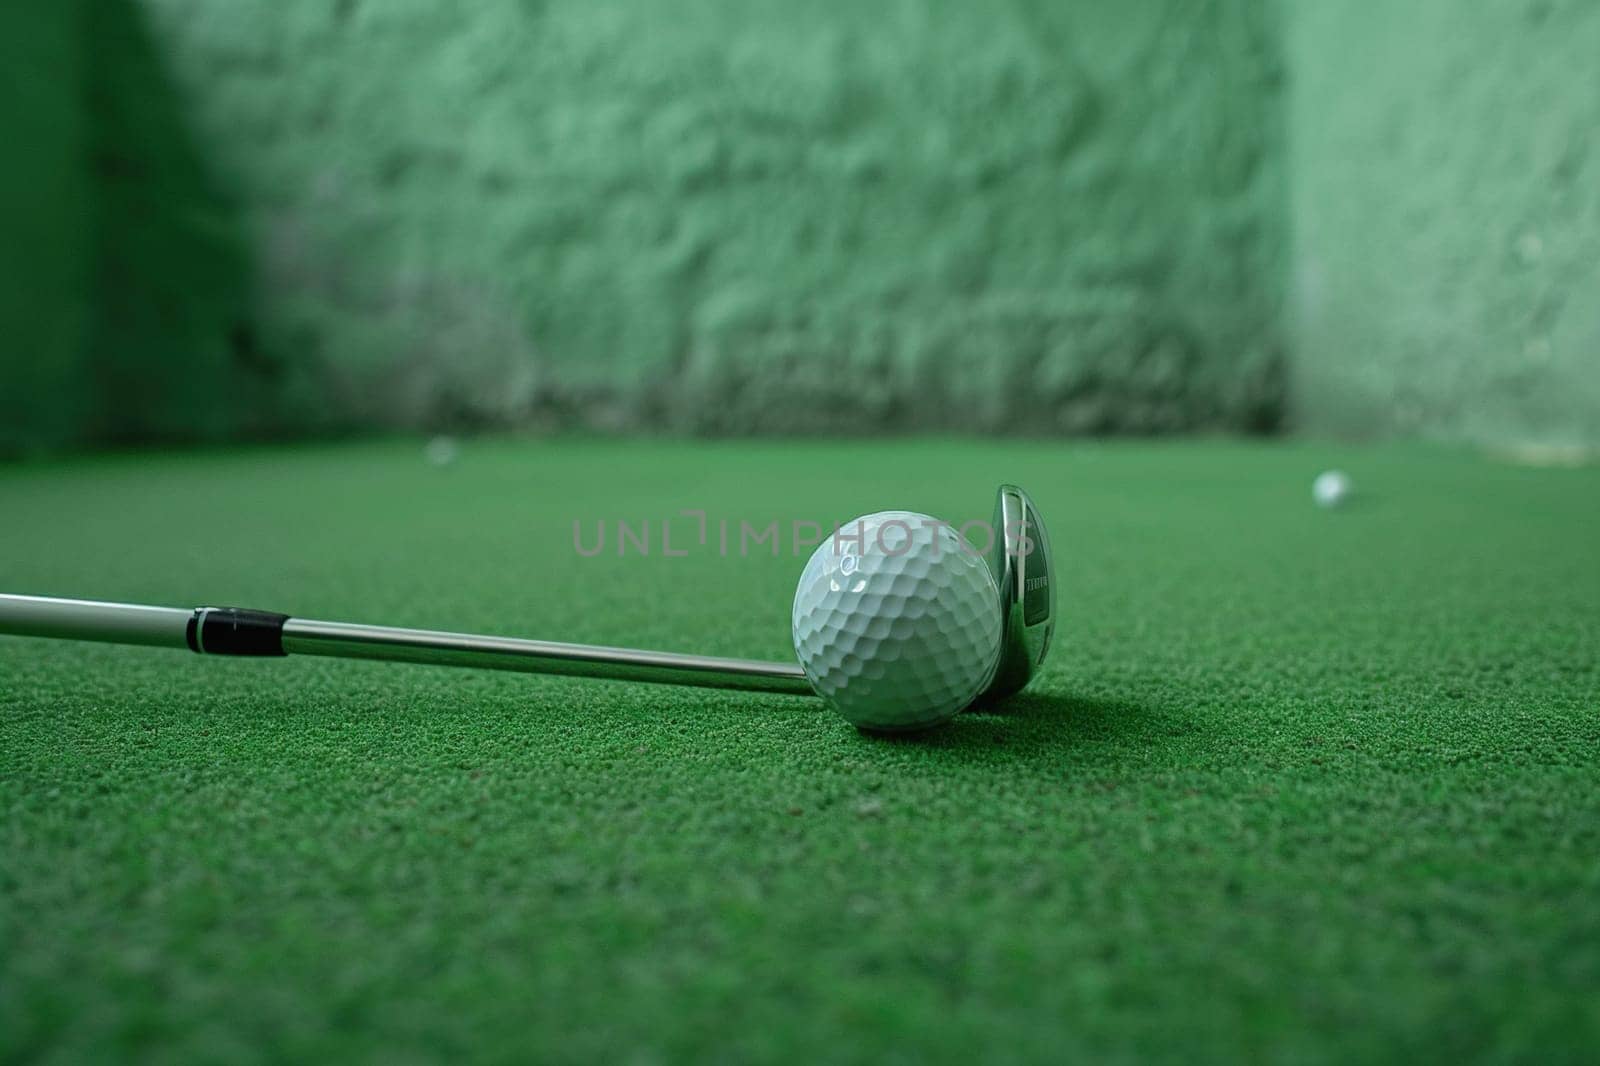 Close-up of a golf ball and club in the practice room. Generated by artificial intelligence by Vovmar